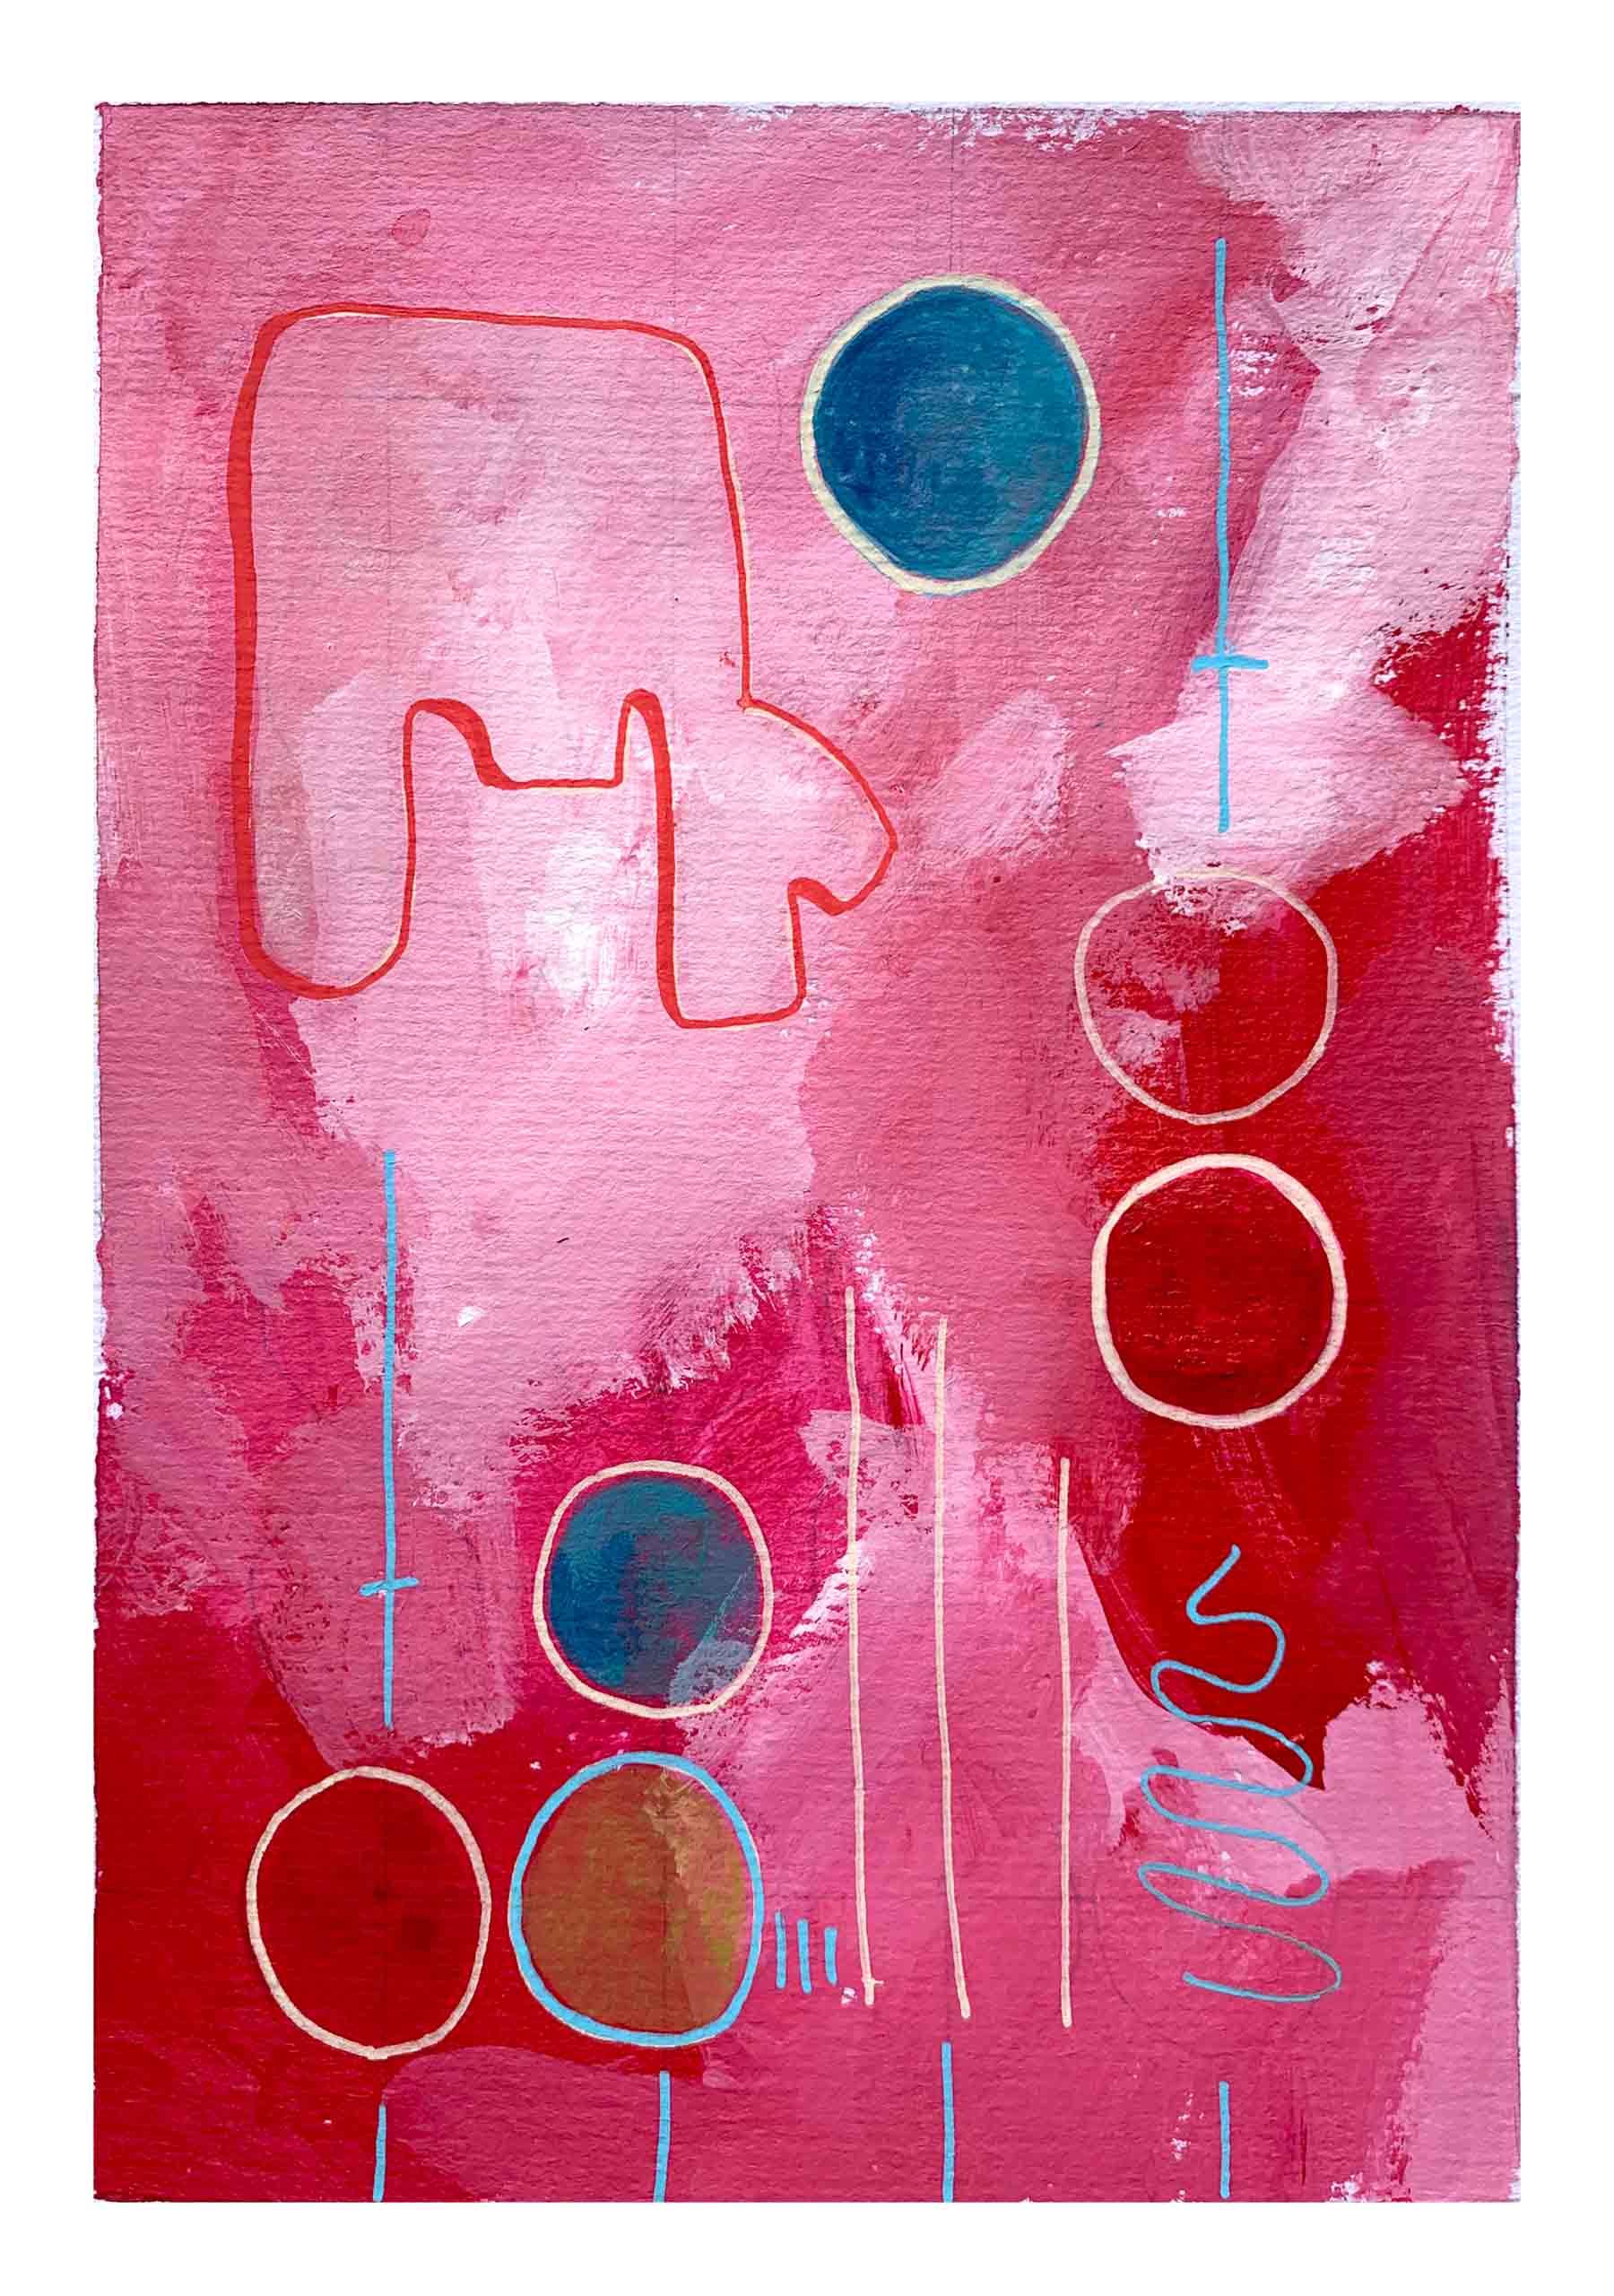 art every day number 624 / painting / pink & red iii